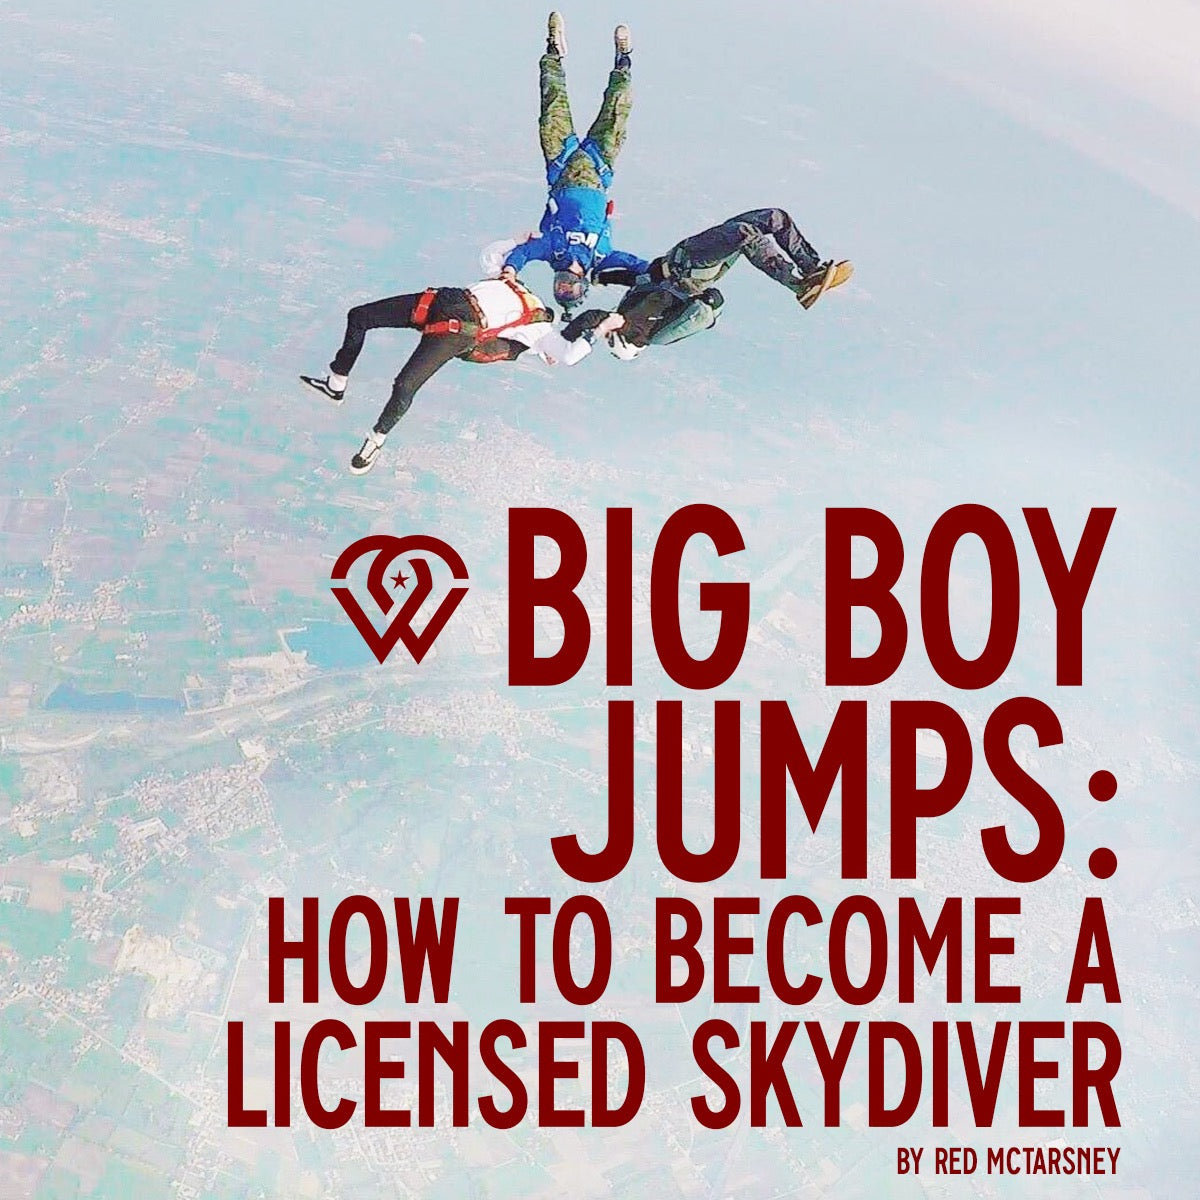 HOW TO BECOME LICENSED SKYDIVER